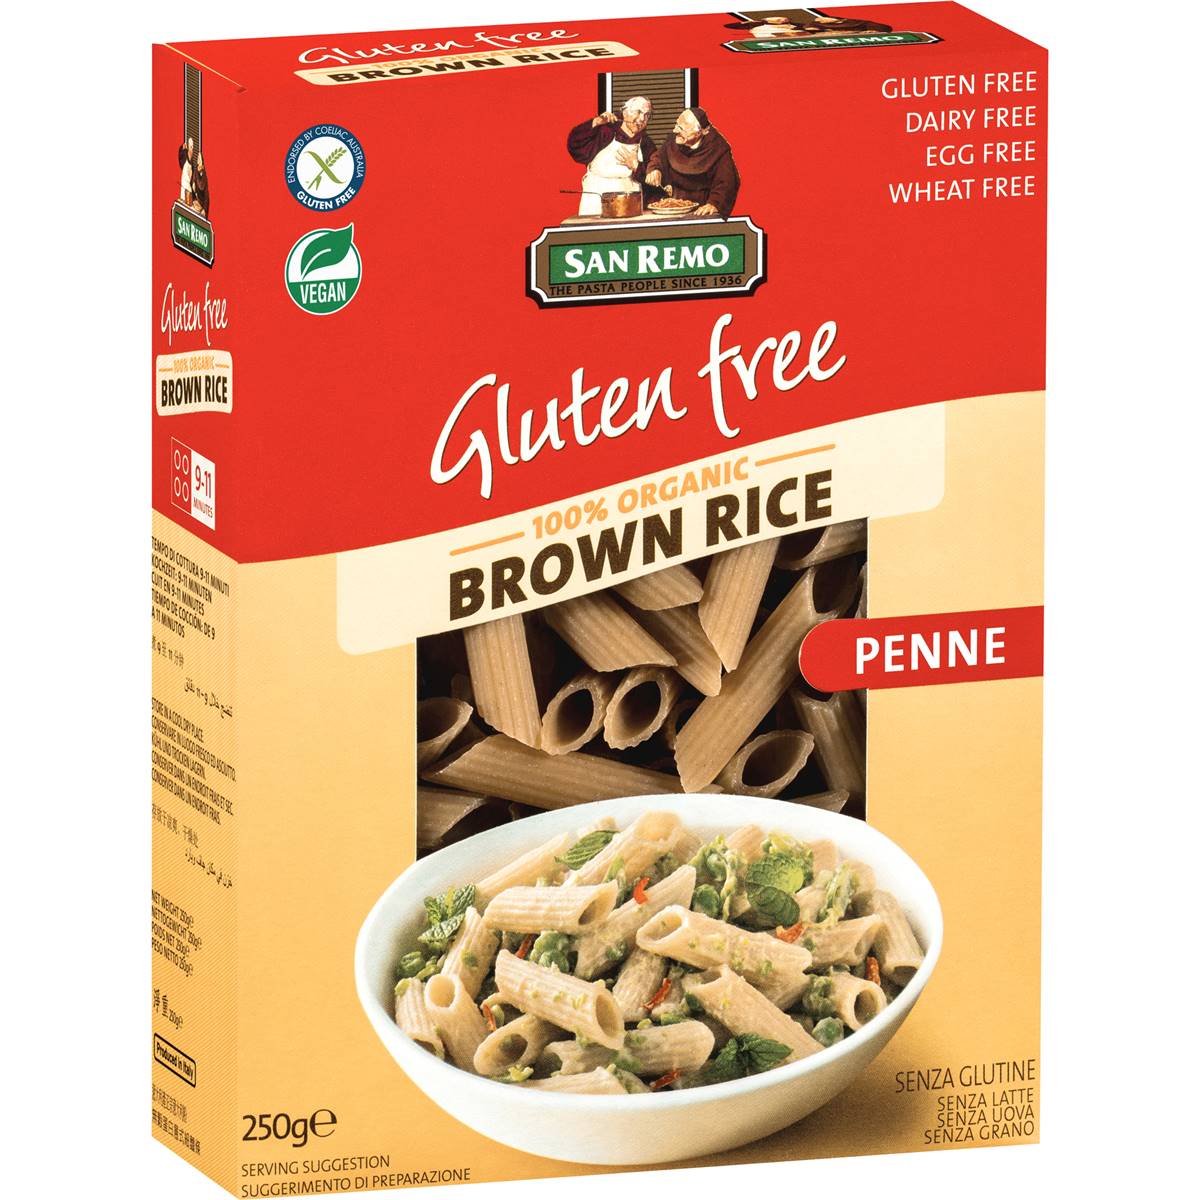 Calories in San Remo Gluten Free Brown Rice Penne